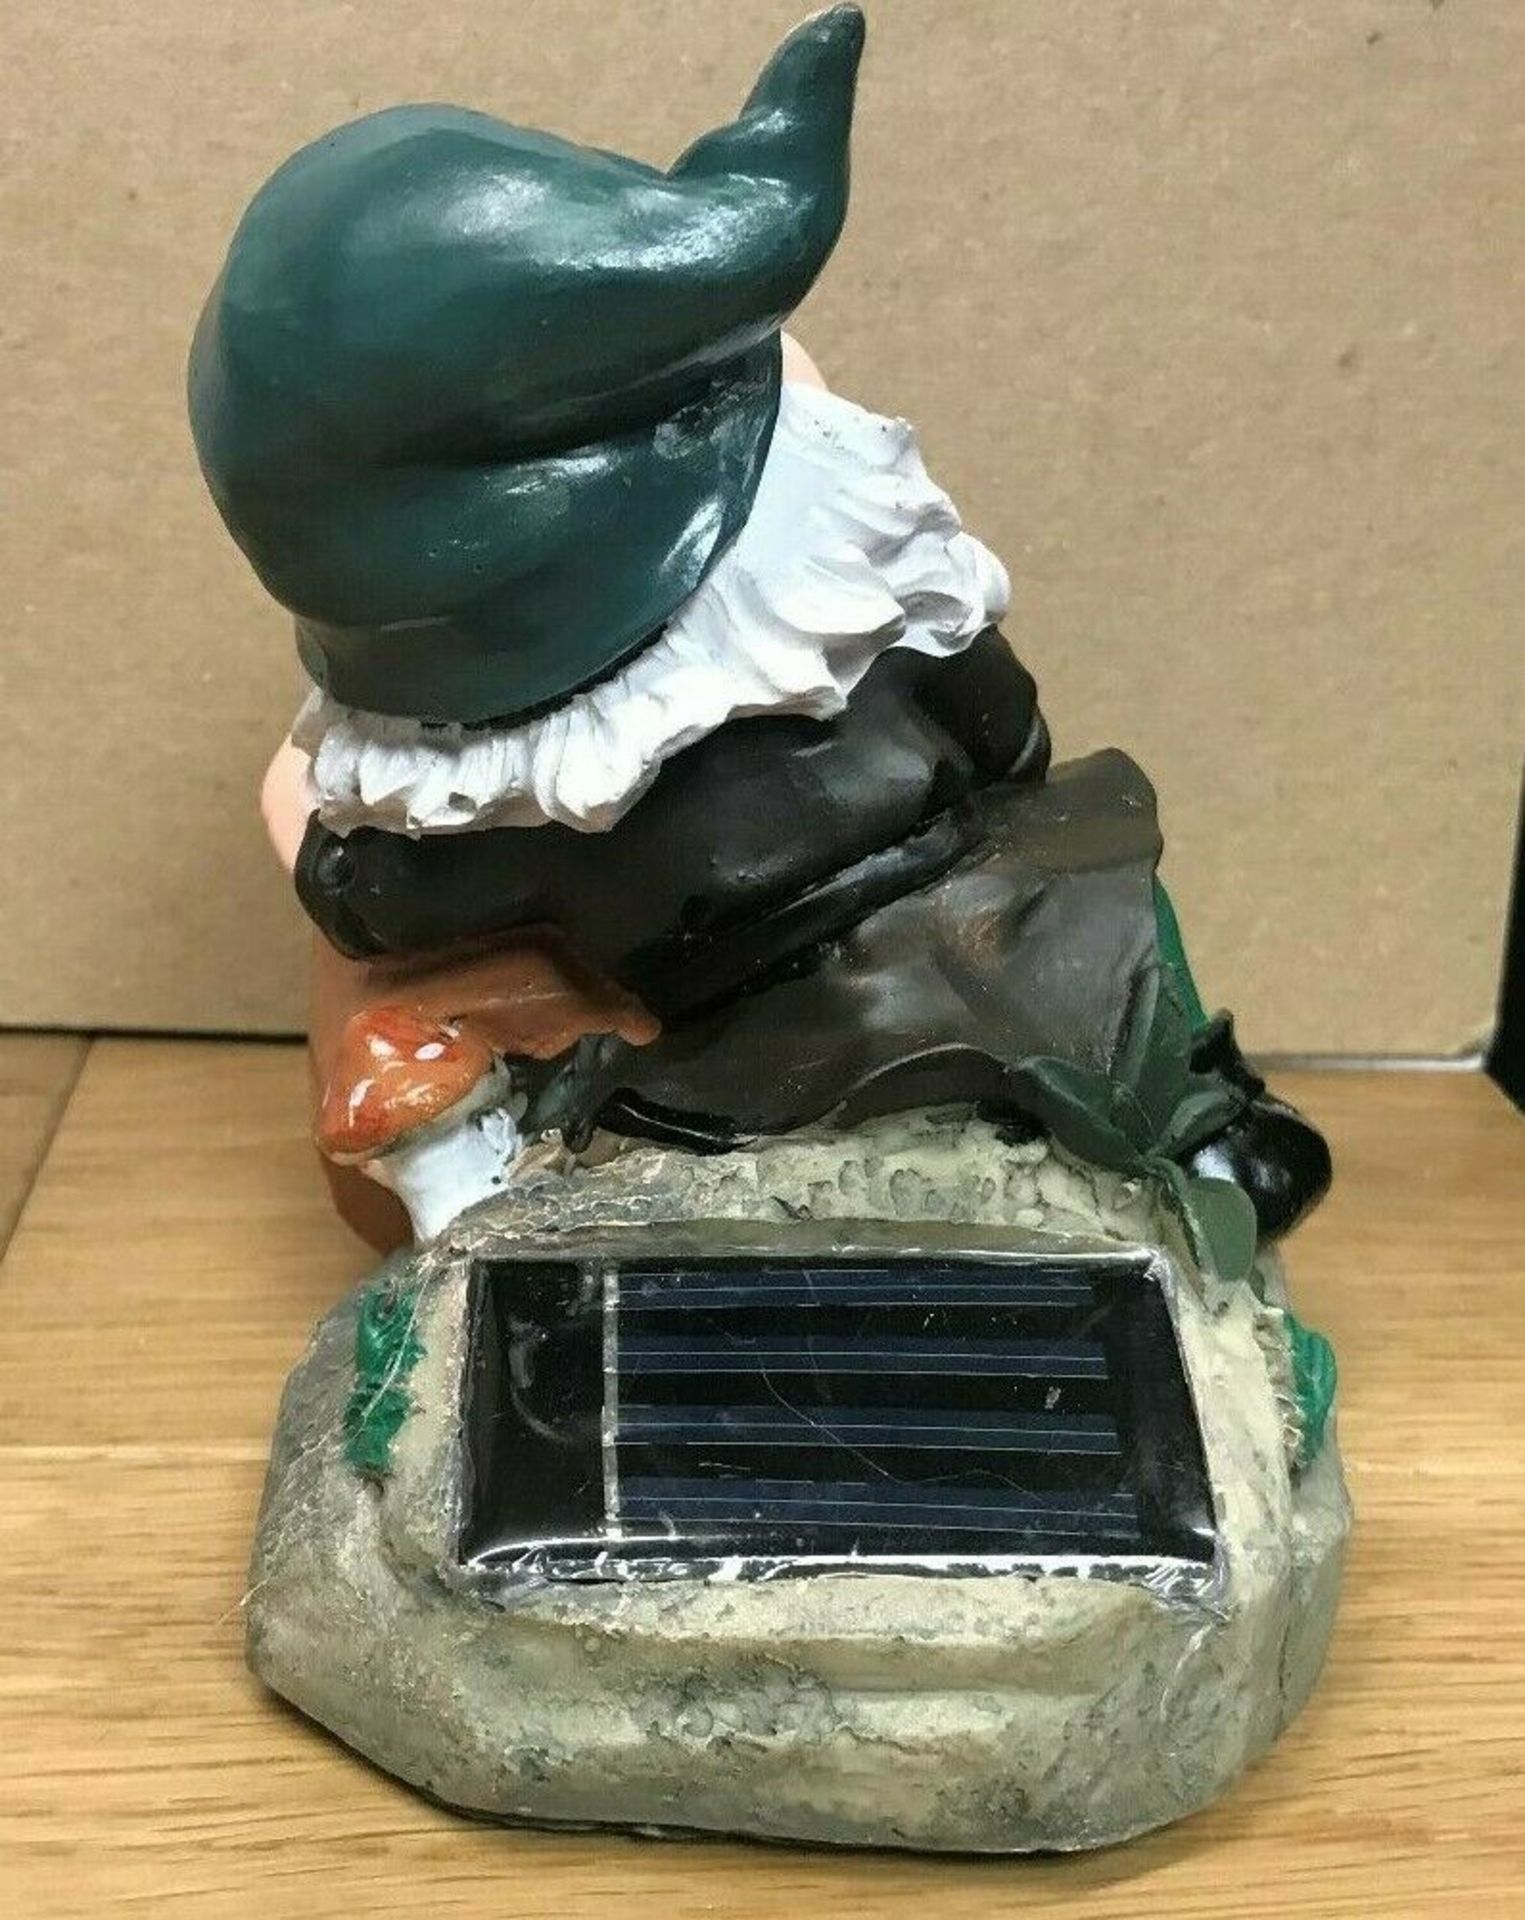 Cheeky Gnome Resin Garden Rockery Patio Solar Light - Pack of 4 Light Total RRP £40 - Image 4 of 7